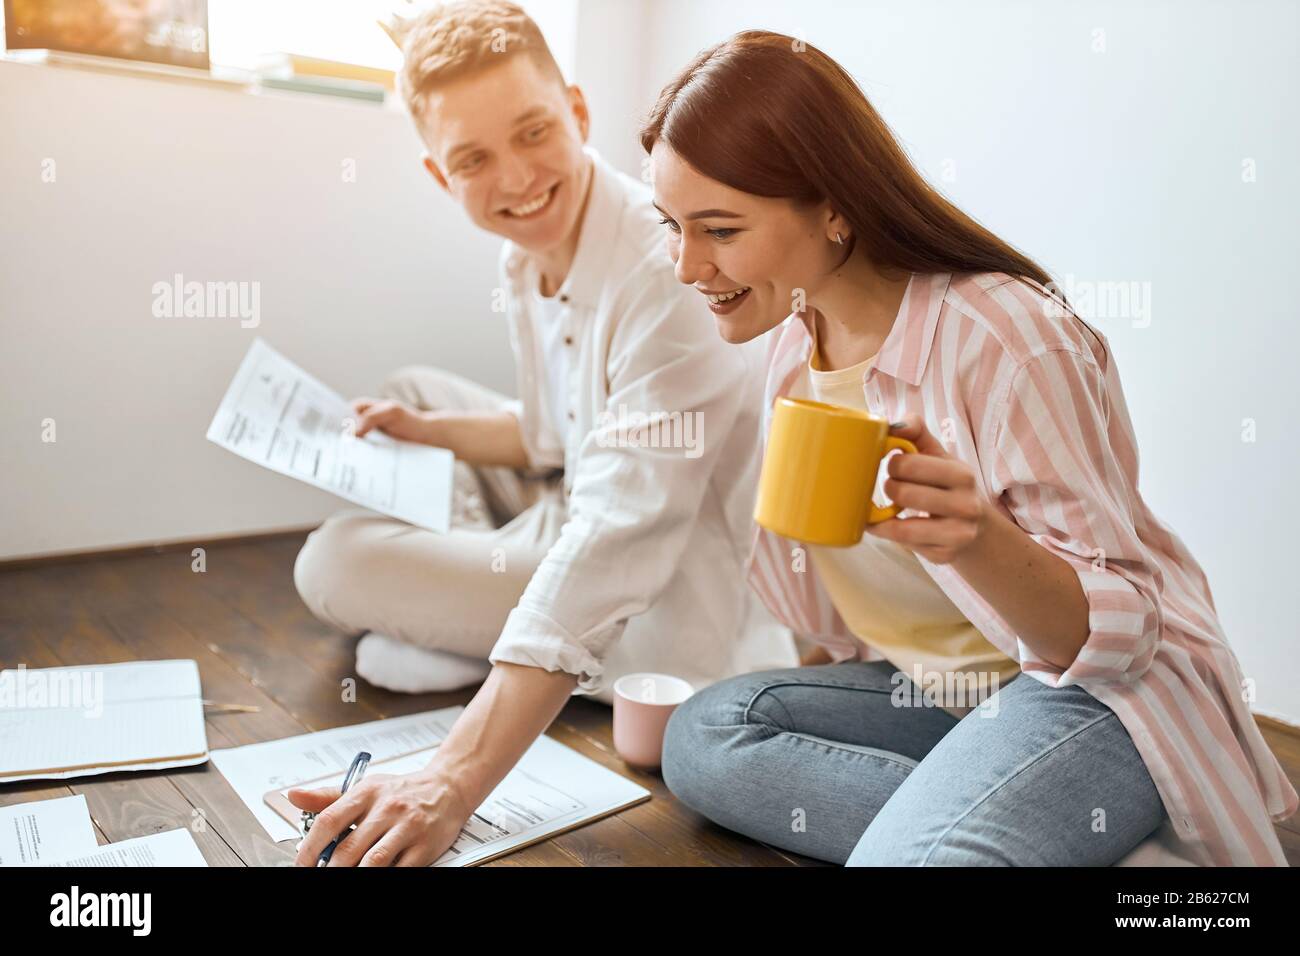 young cheerful happy family havinf fun in the living room, spare time, lifestyle, young man and woman earning much money, close up side view photo Stock Photo